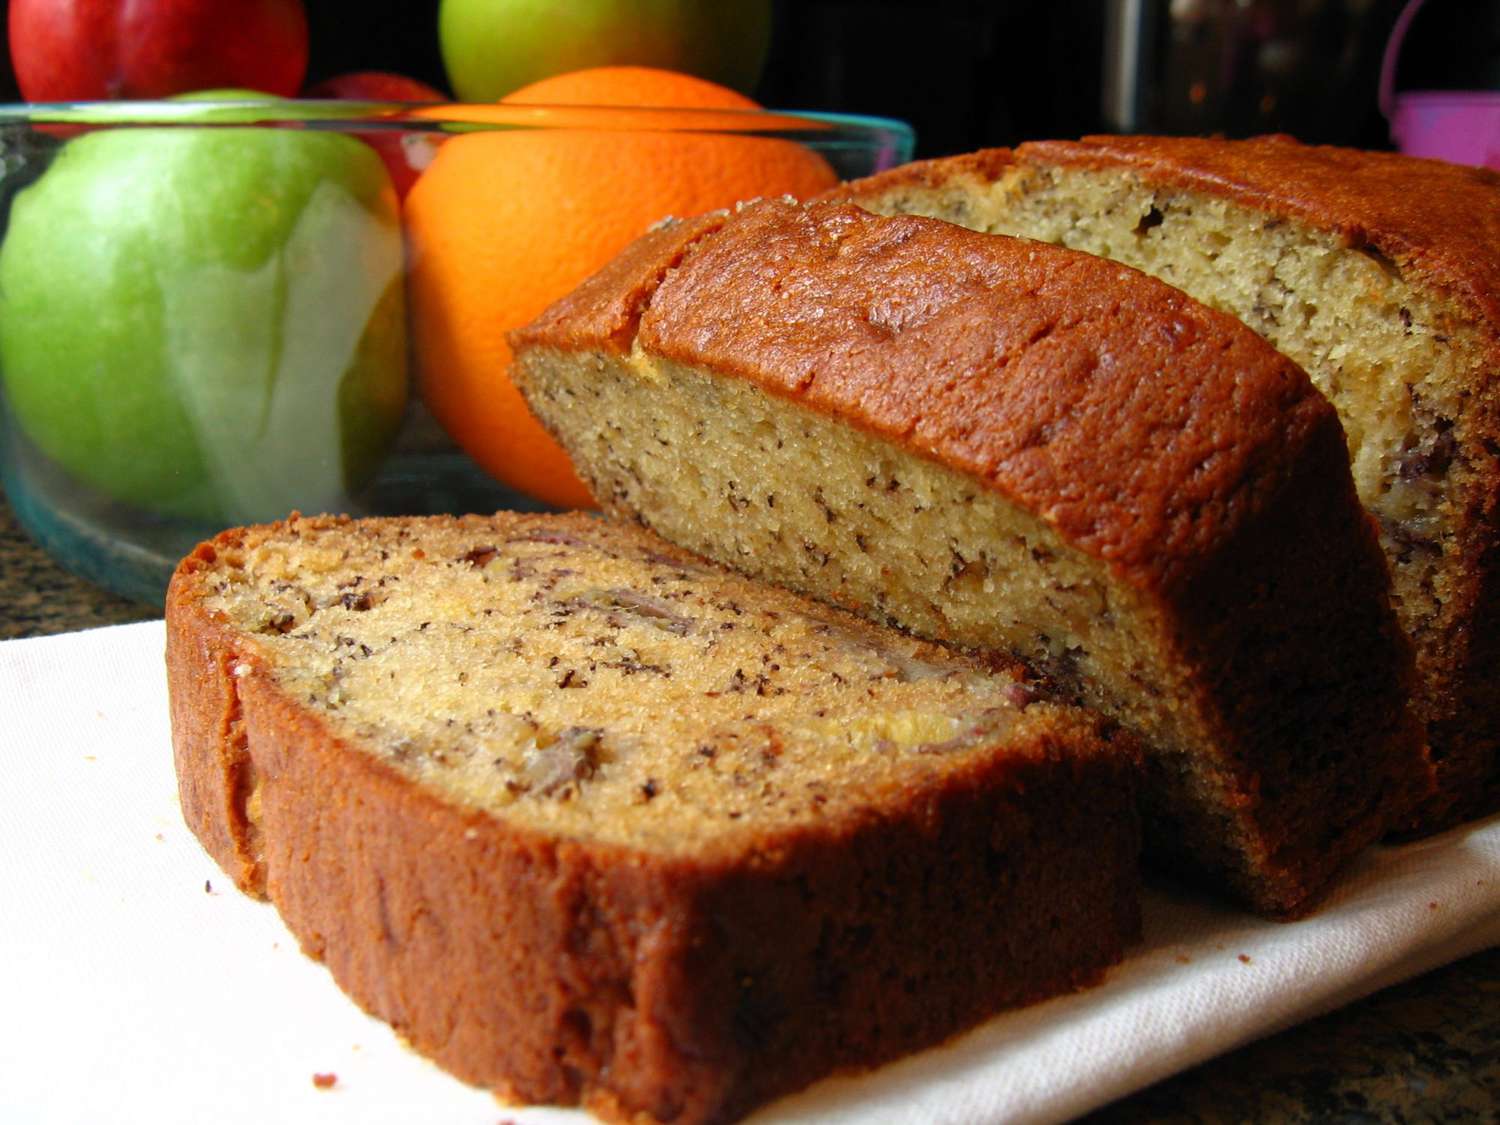 Janets Rich Banana Bread 2: A Delicious and Easy Recipe